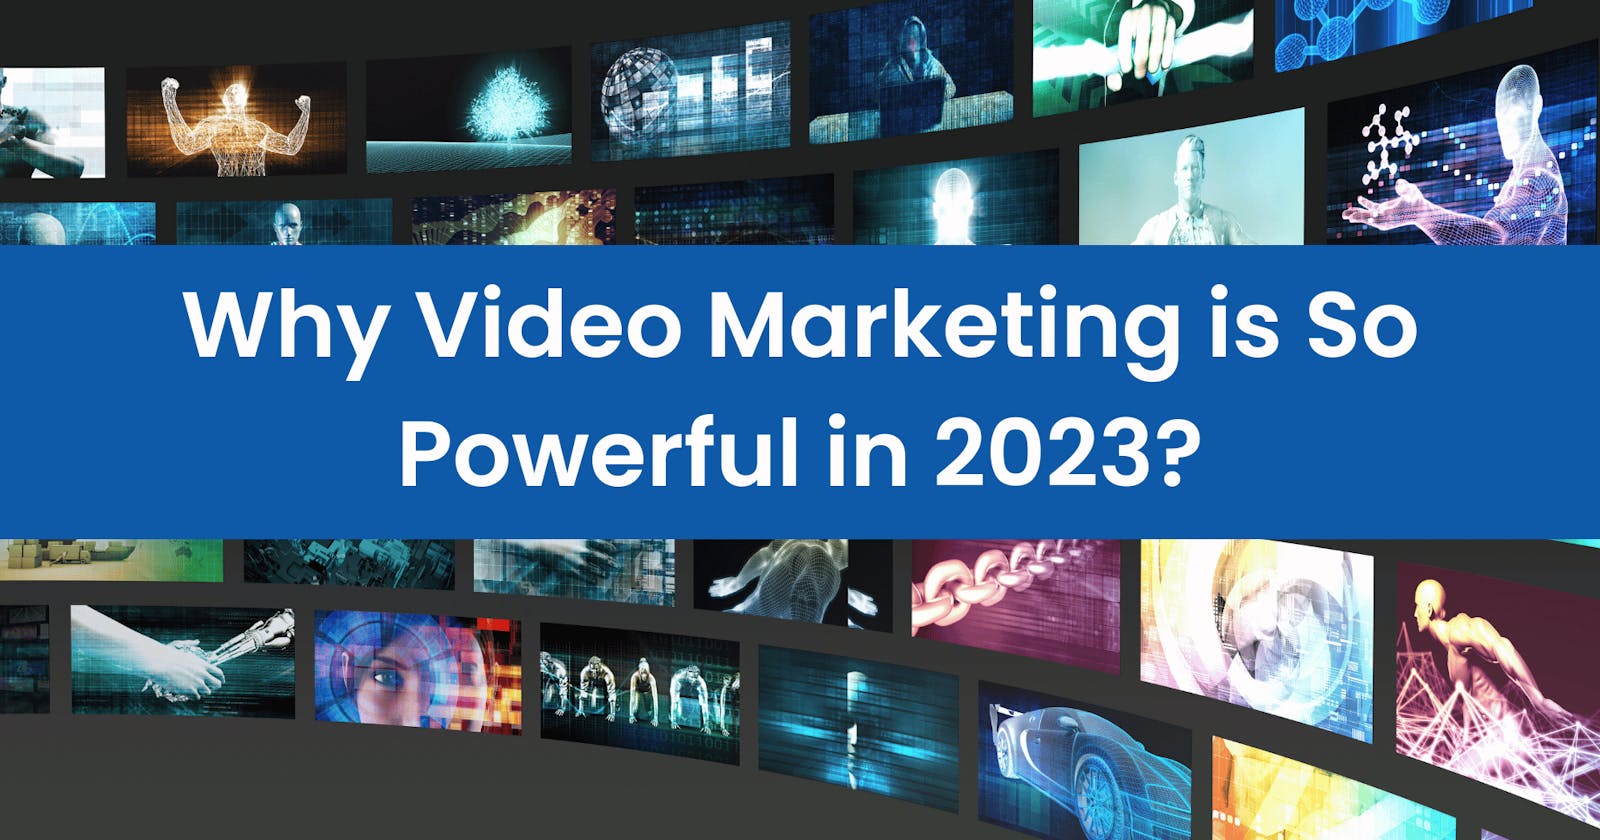 Why Video Marketing is So Powerful in 2023?